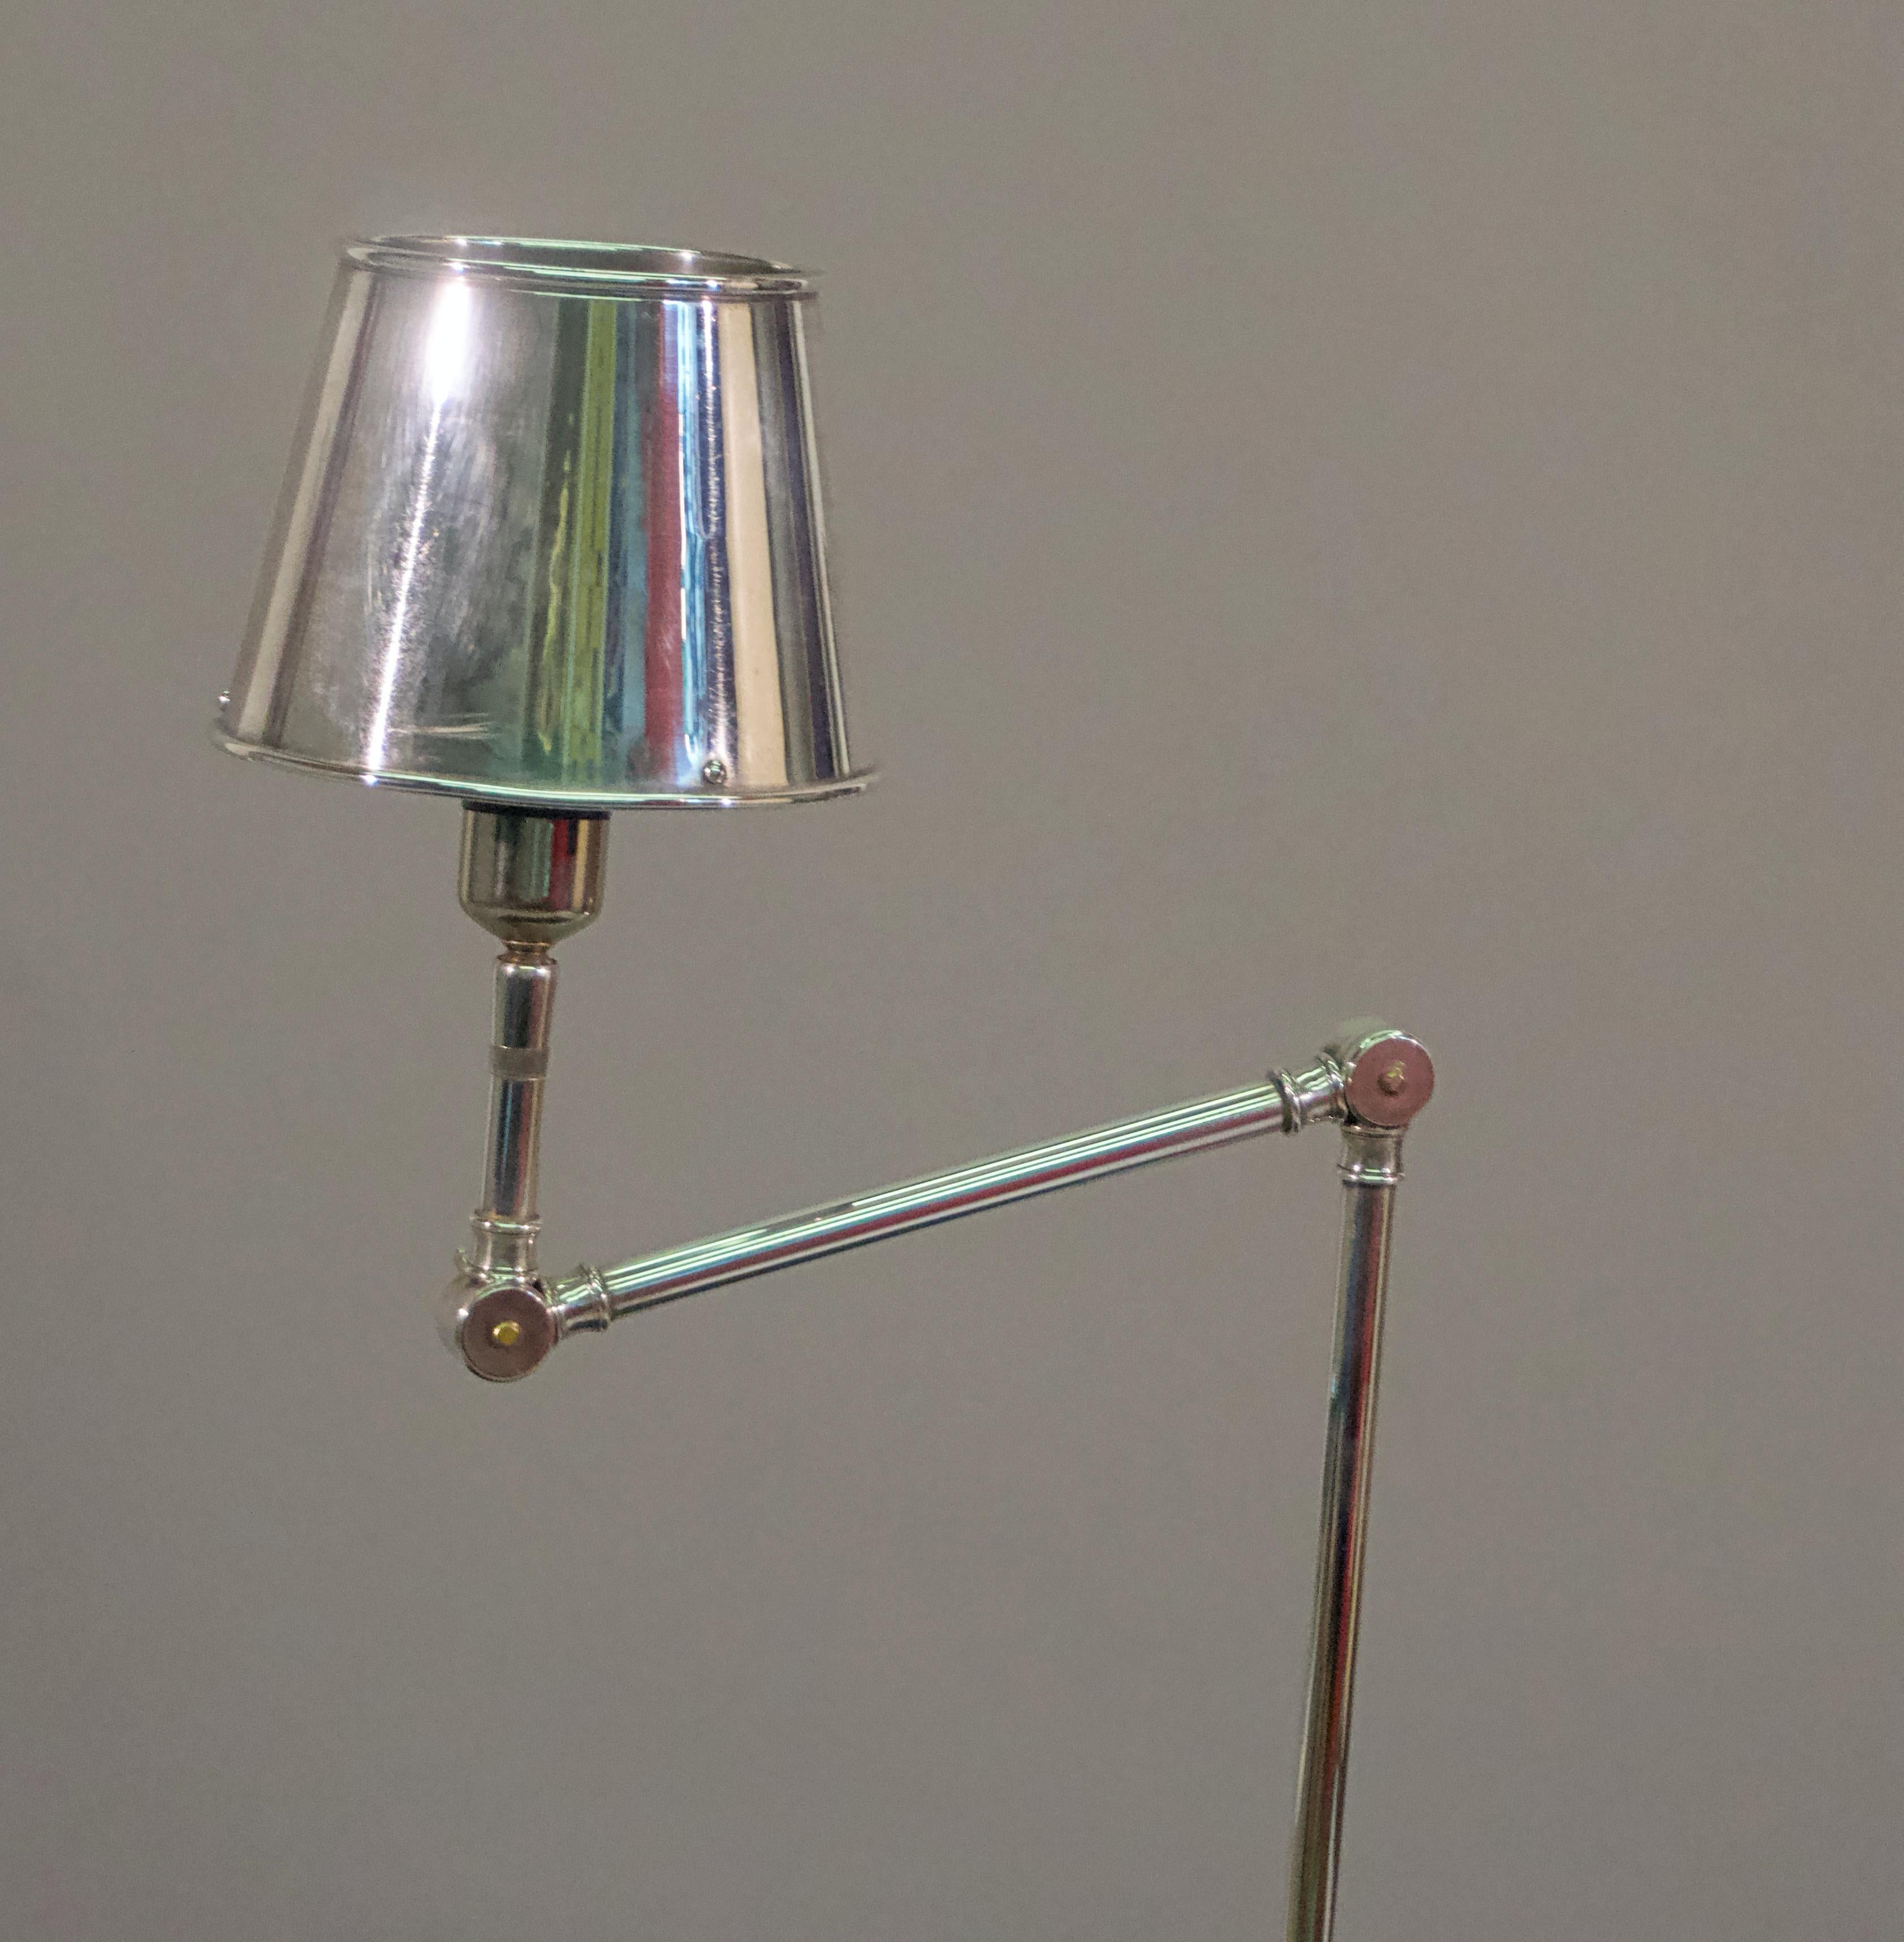 Reading lamp
Cast in solid brass, triple plated in silver, polished and sealed in lacquer
Measures: Height 44”, base 12”, shade 5 1/2”.